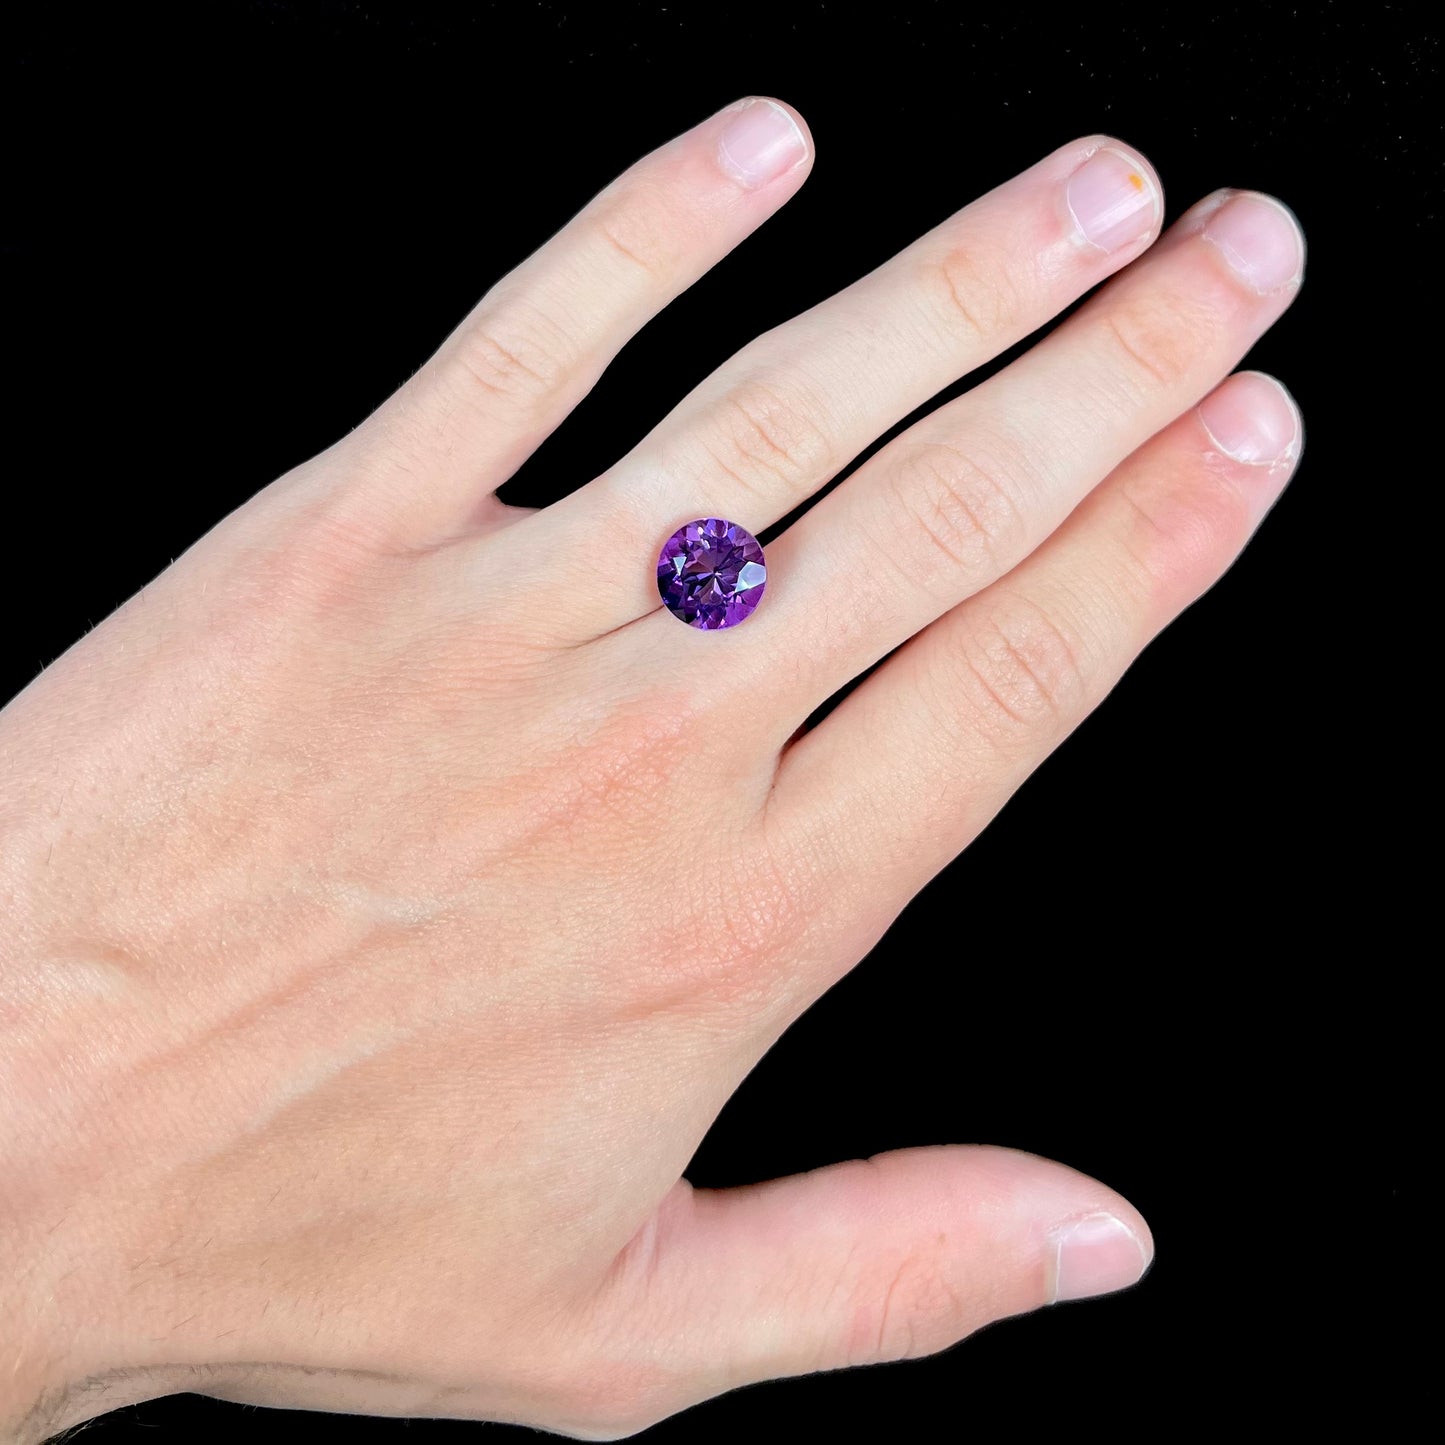 A loose, faceted round brilliant cut amethyst gemstone.  The stone is purple with blue flashes.